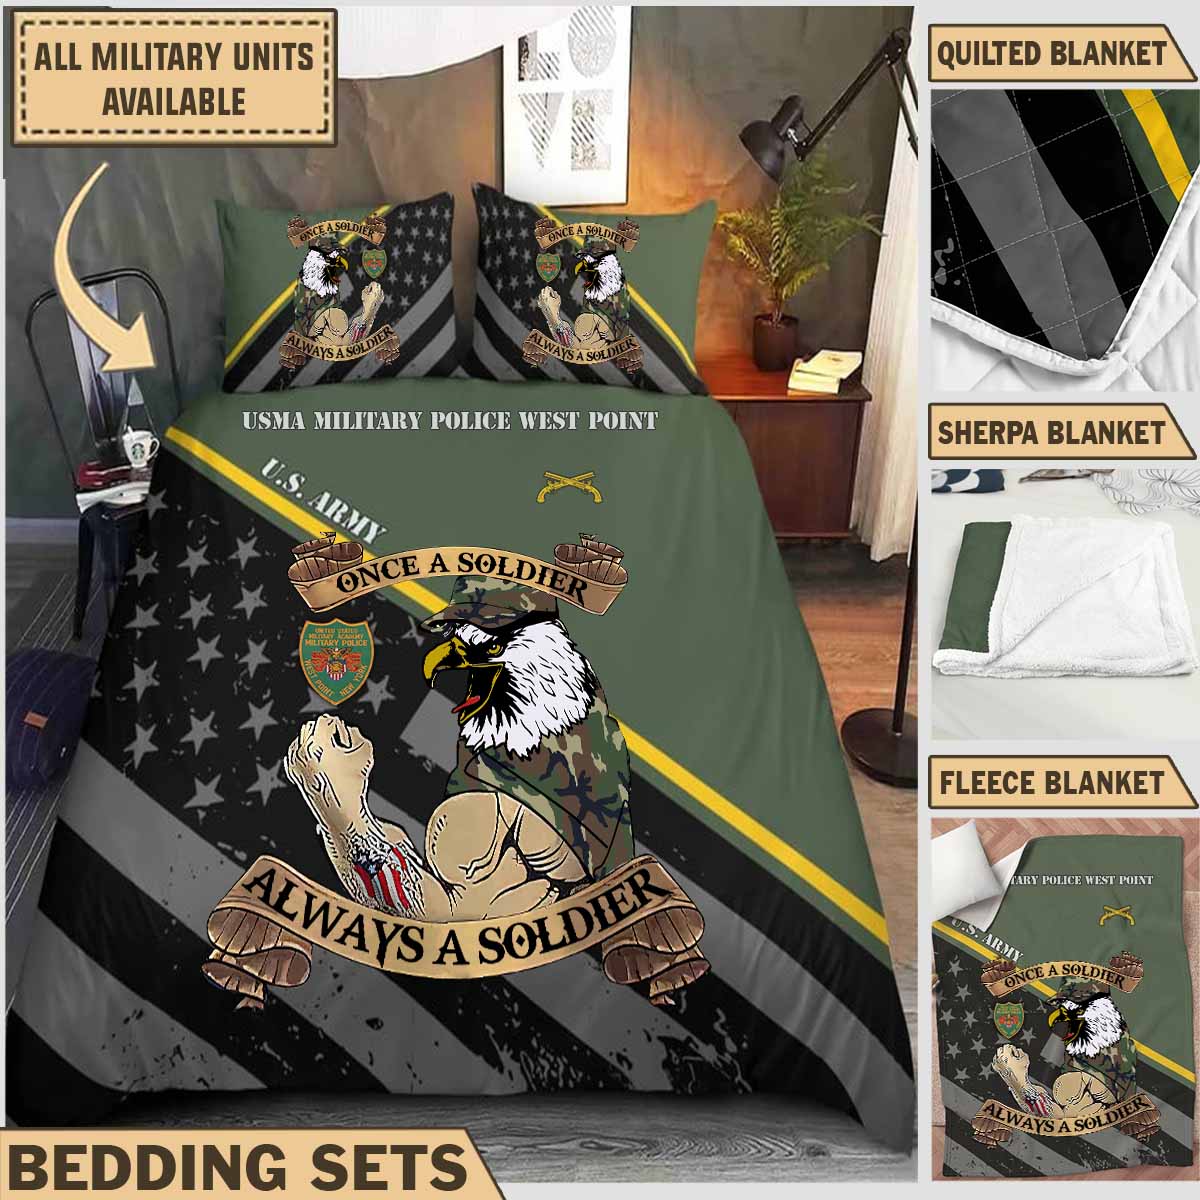 USMA Military Police West Point_Bedding Collection